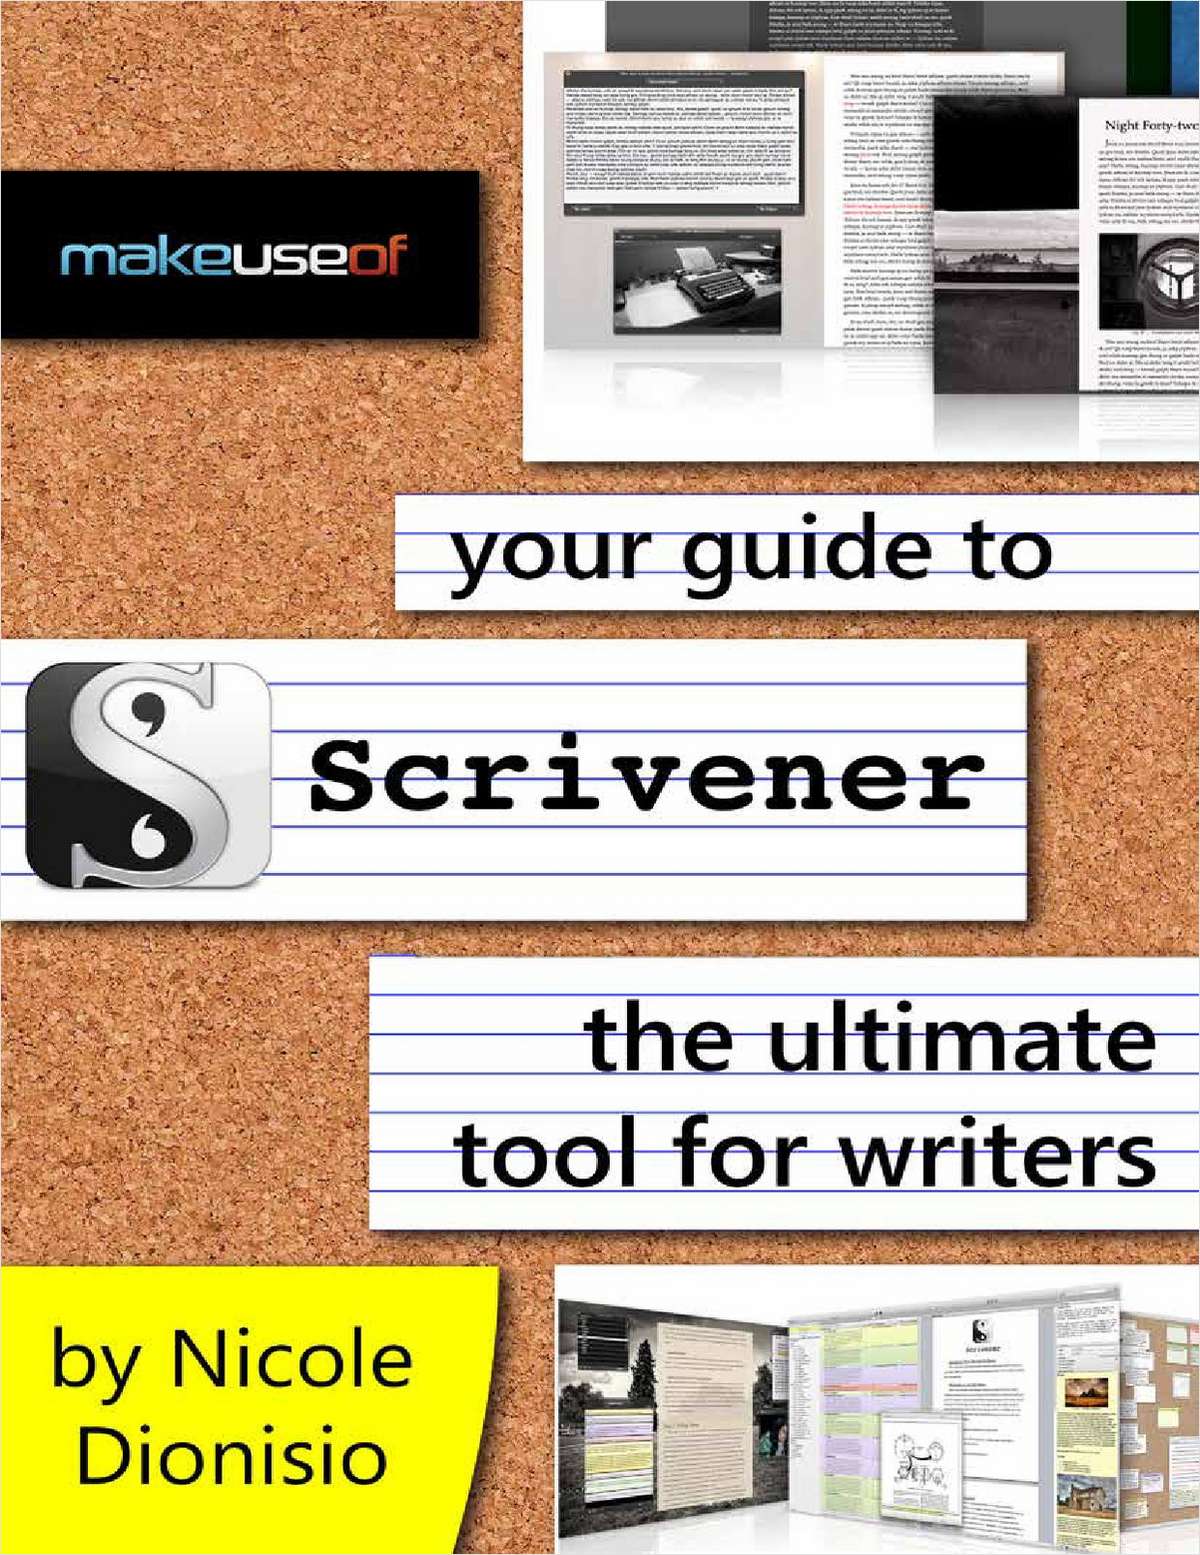 Your Guide to Scrivener: The Ultimate Tool for Writers